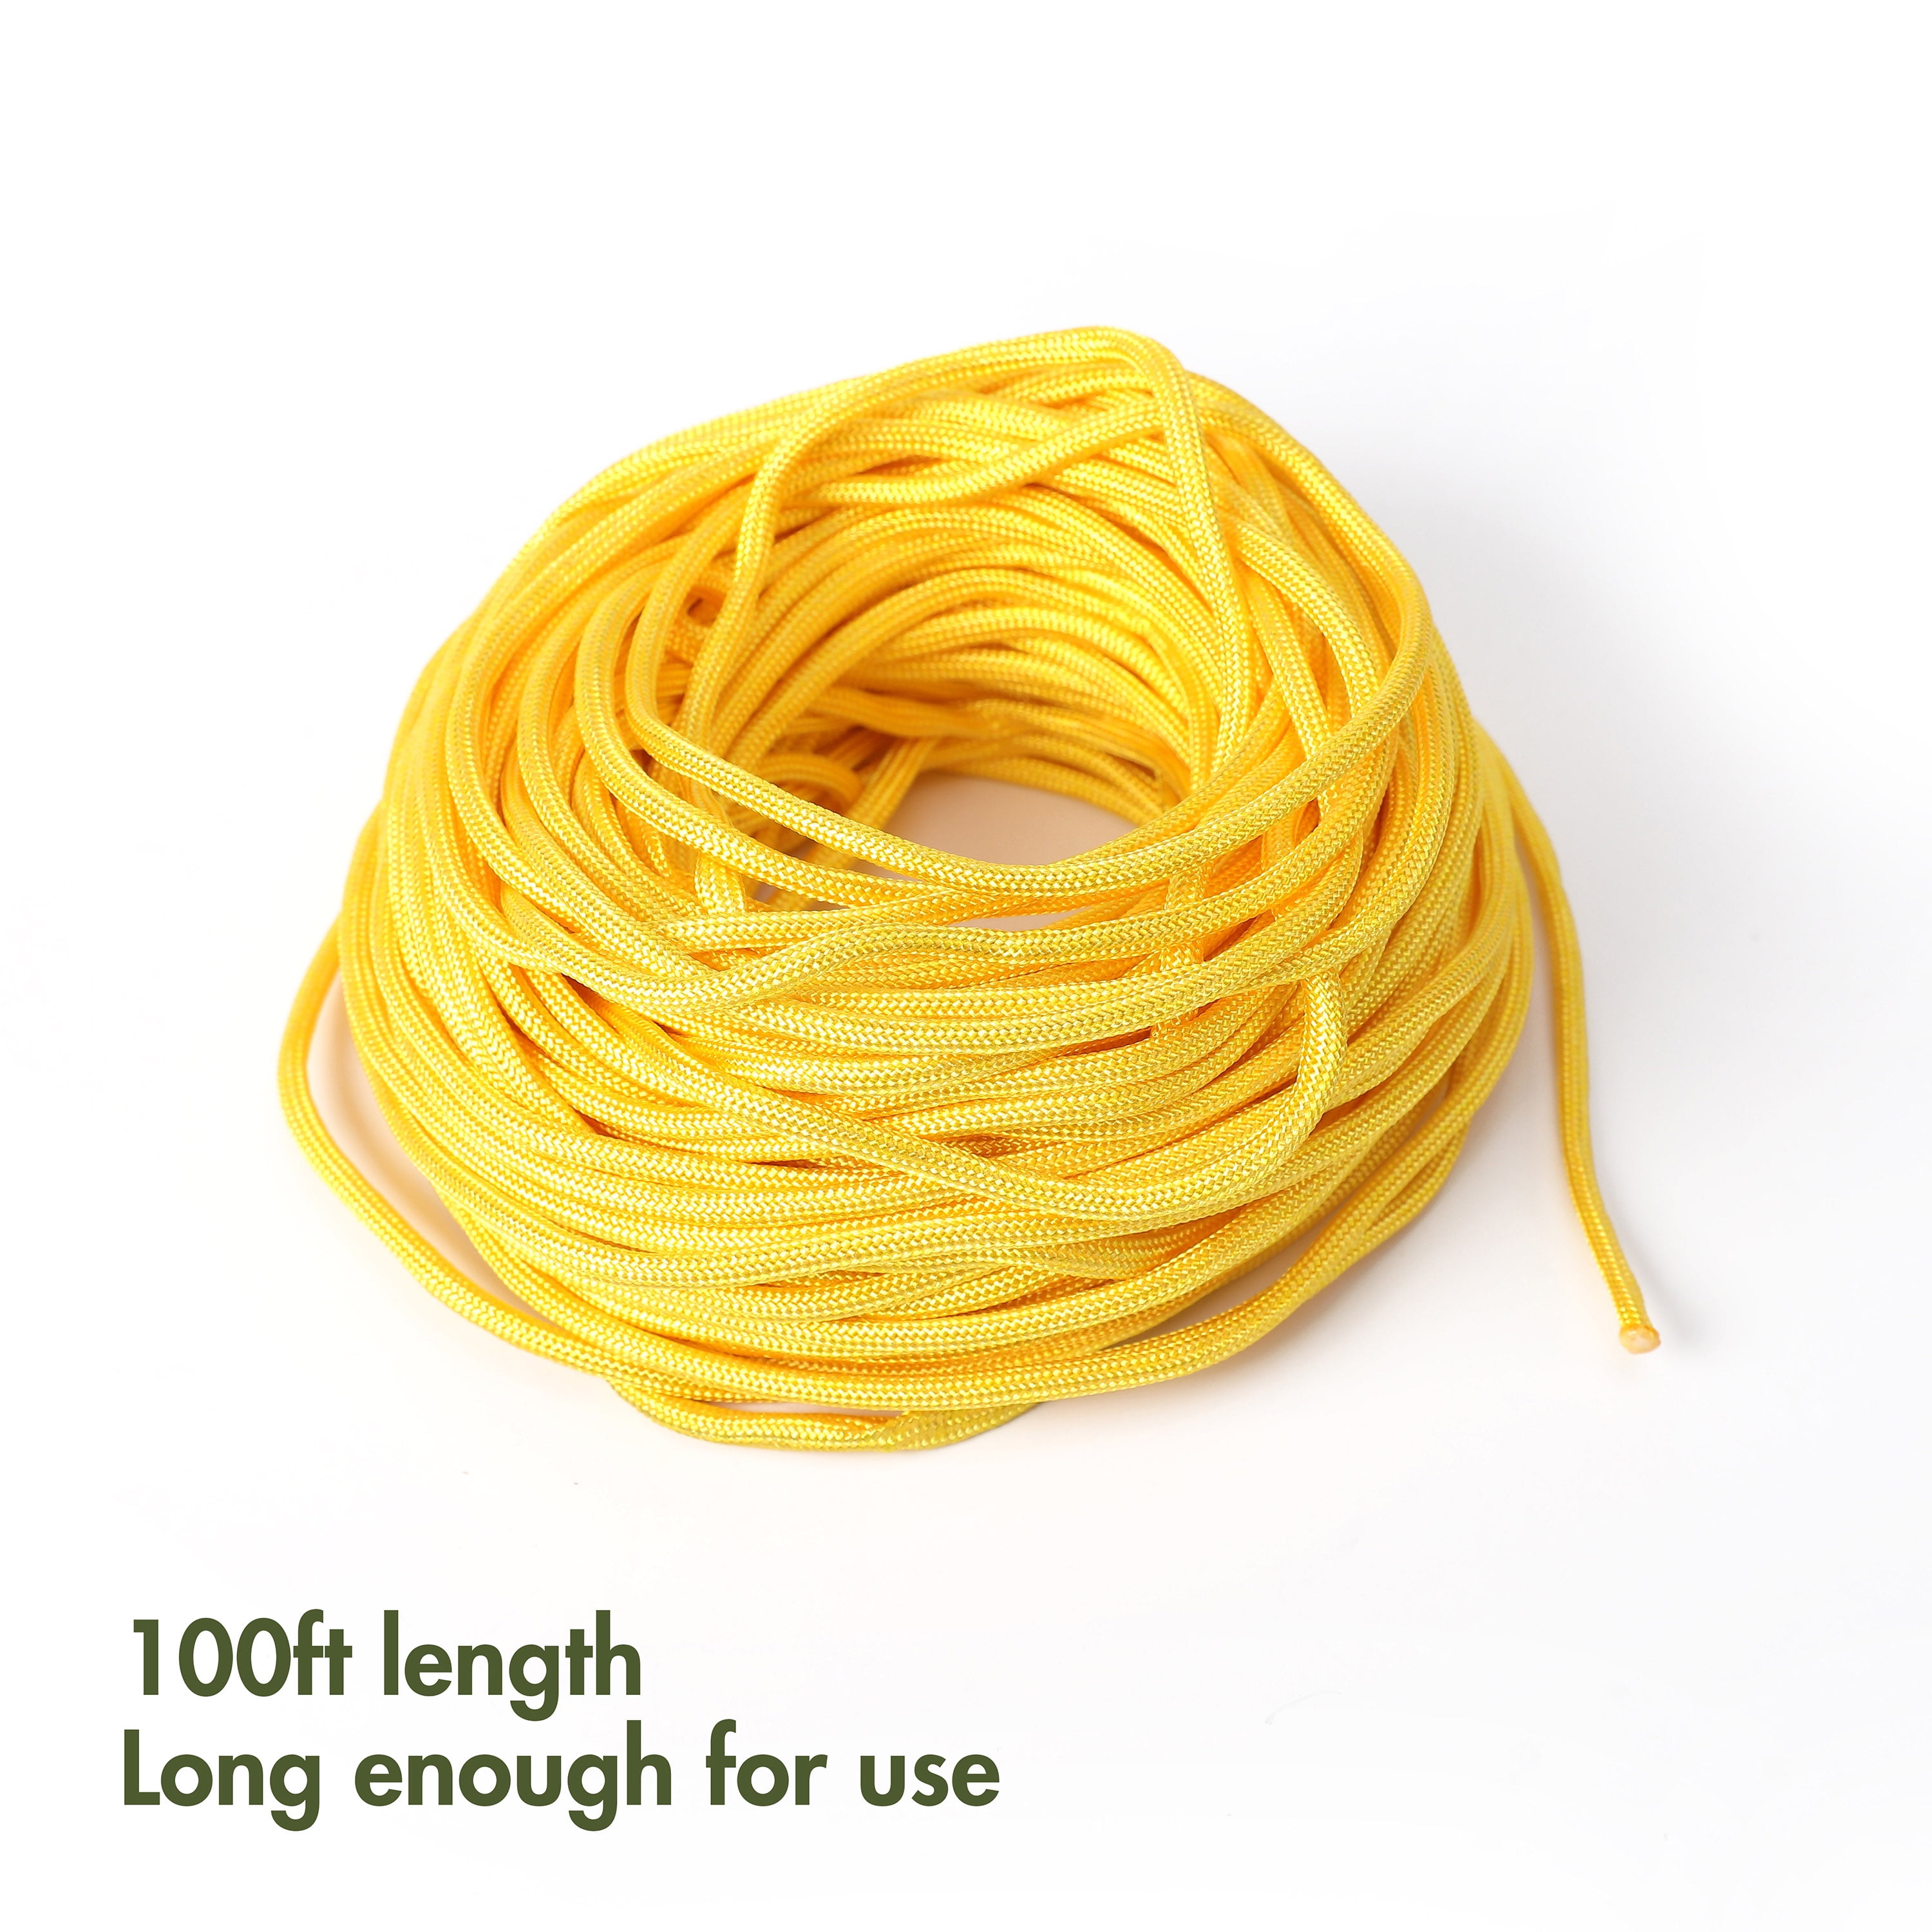 Ozark Trail 100 Foot 550lbs Paracord, 100% Polyester, Yellow